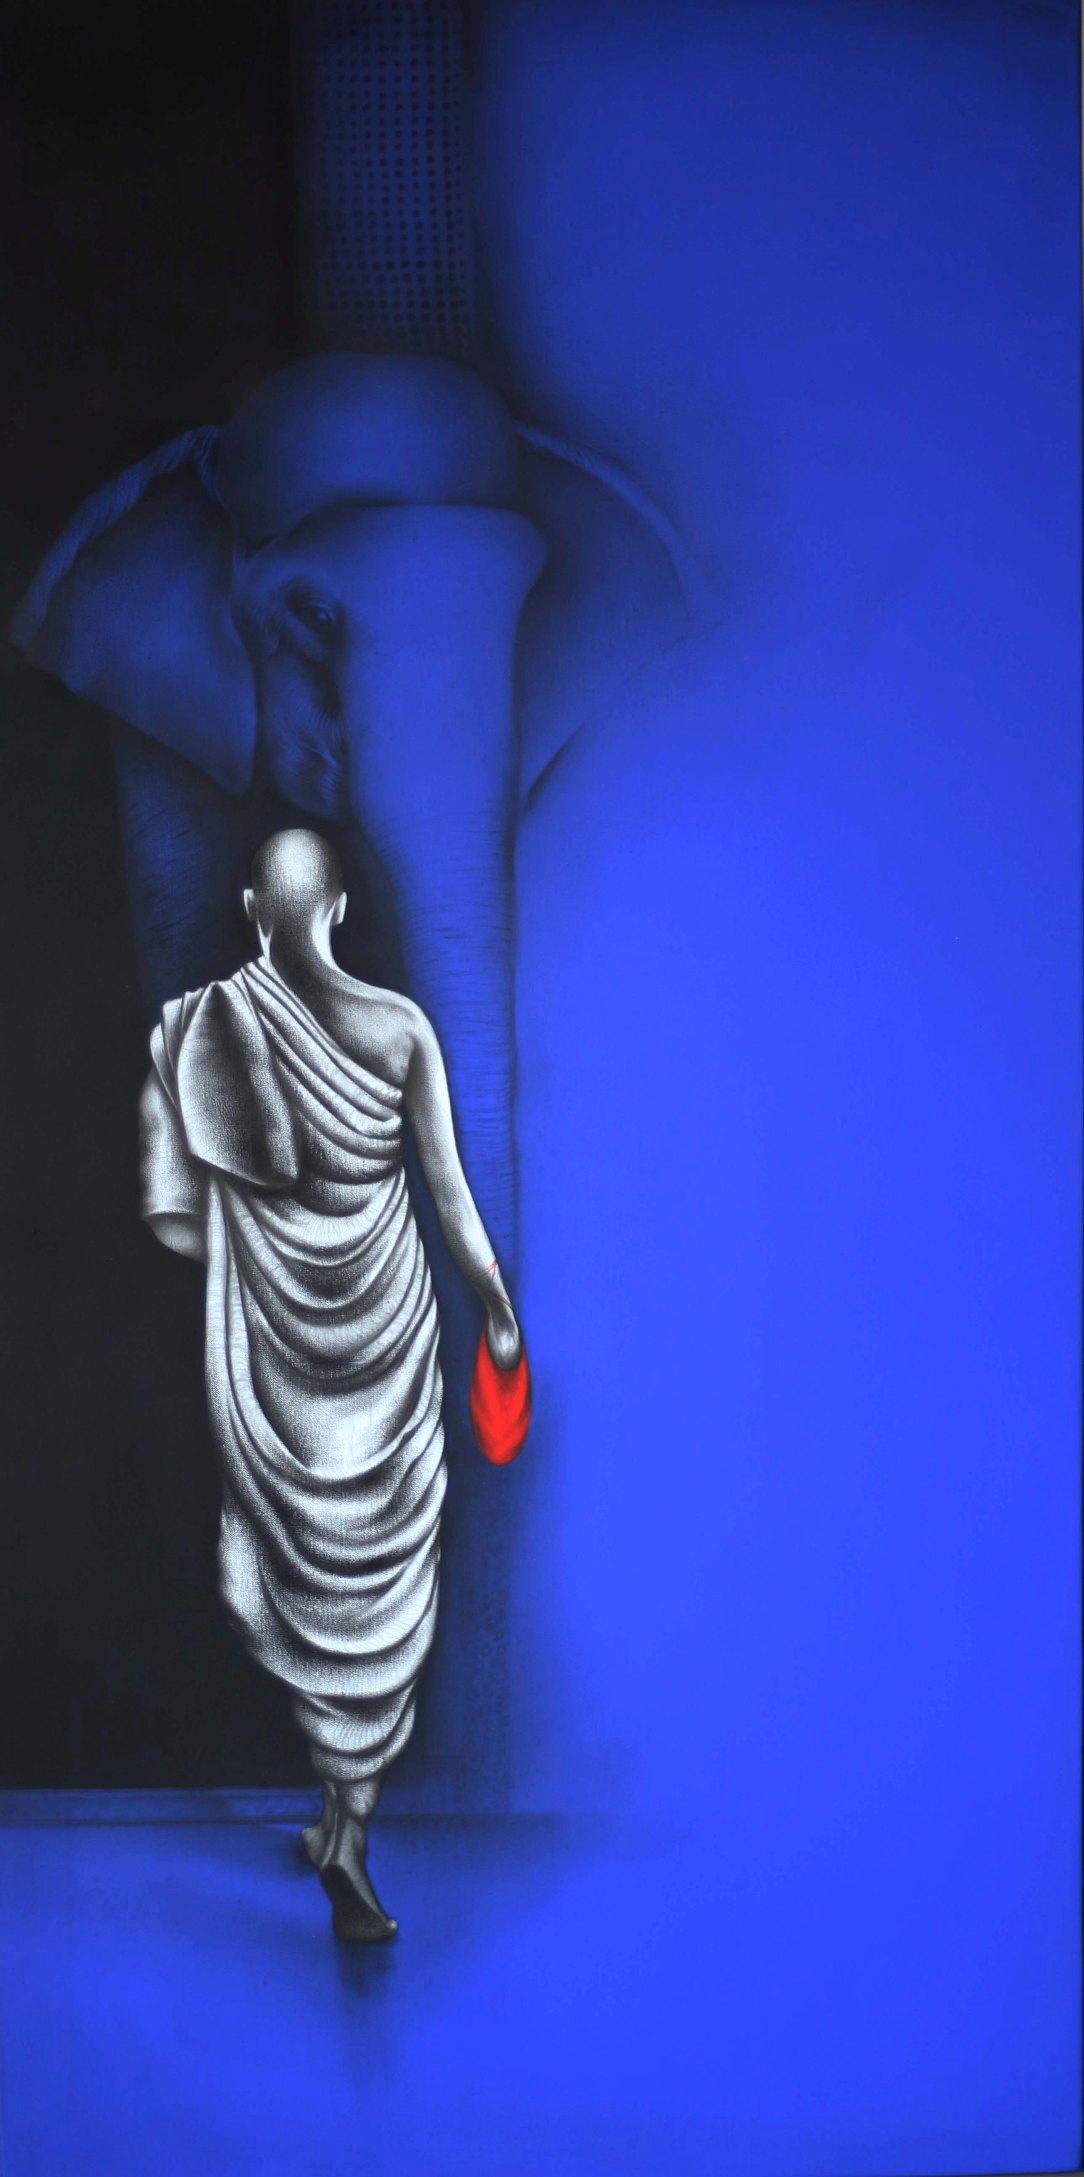 Monk, Charcoal on Canvas Blue, Black, White colour by Indian Artist "In Stock"